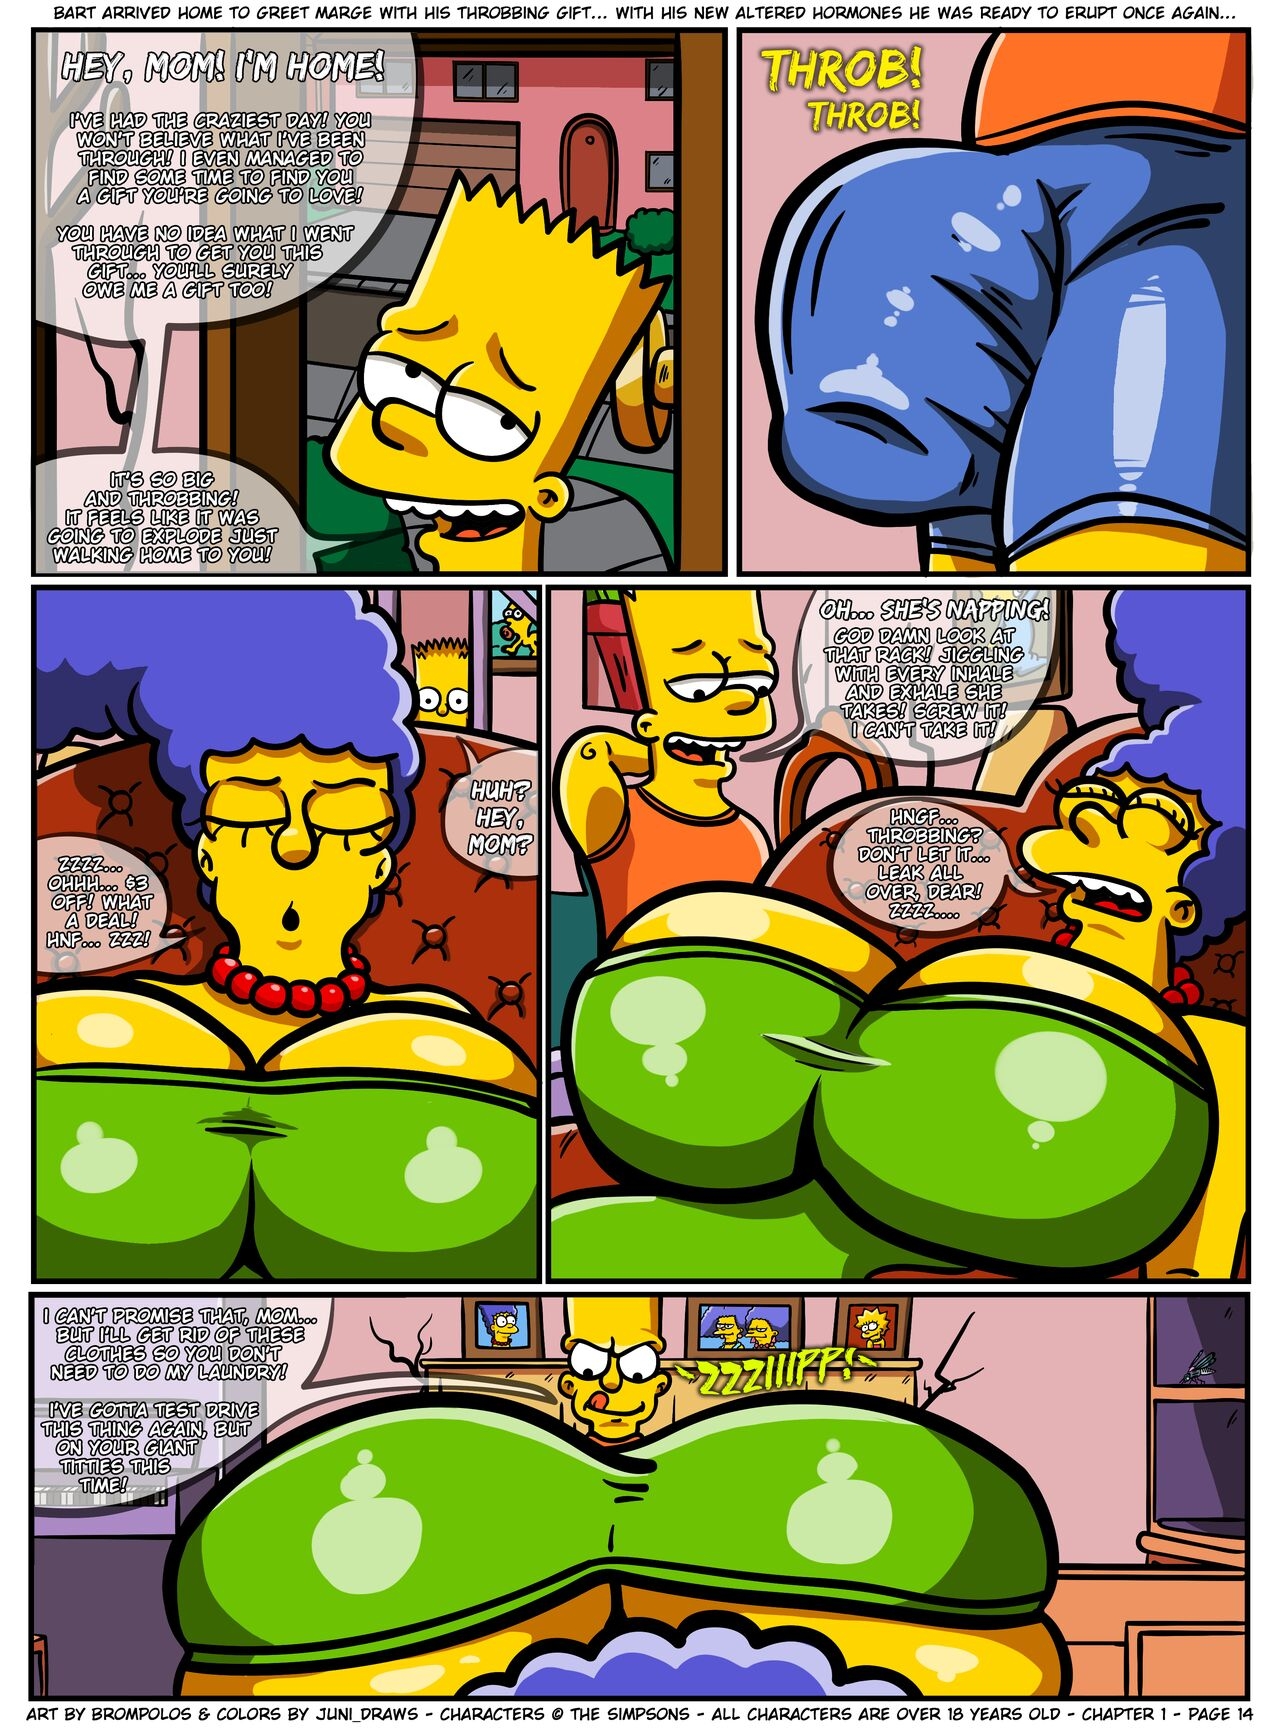 [Brompolos/Juni_Draws] The Sexensteins (Simpsons) [Ongoing] 14